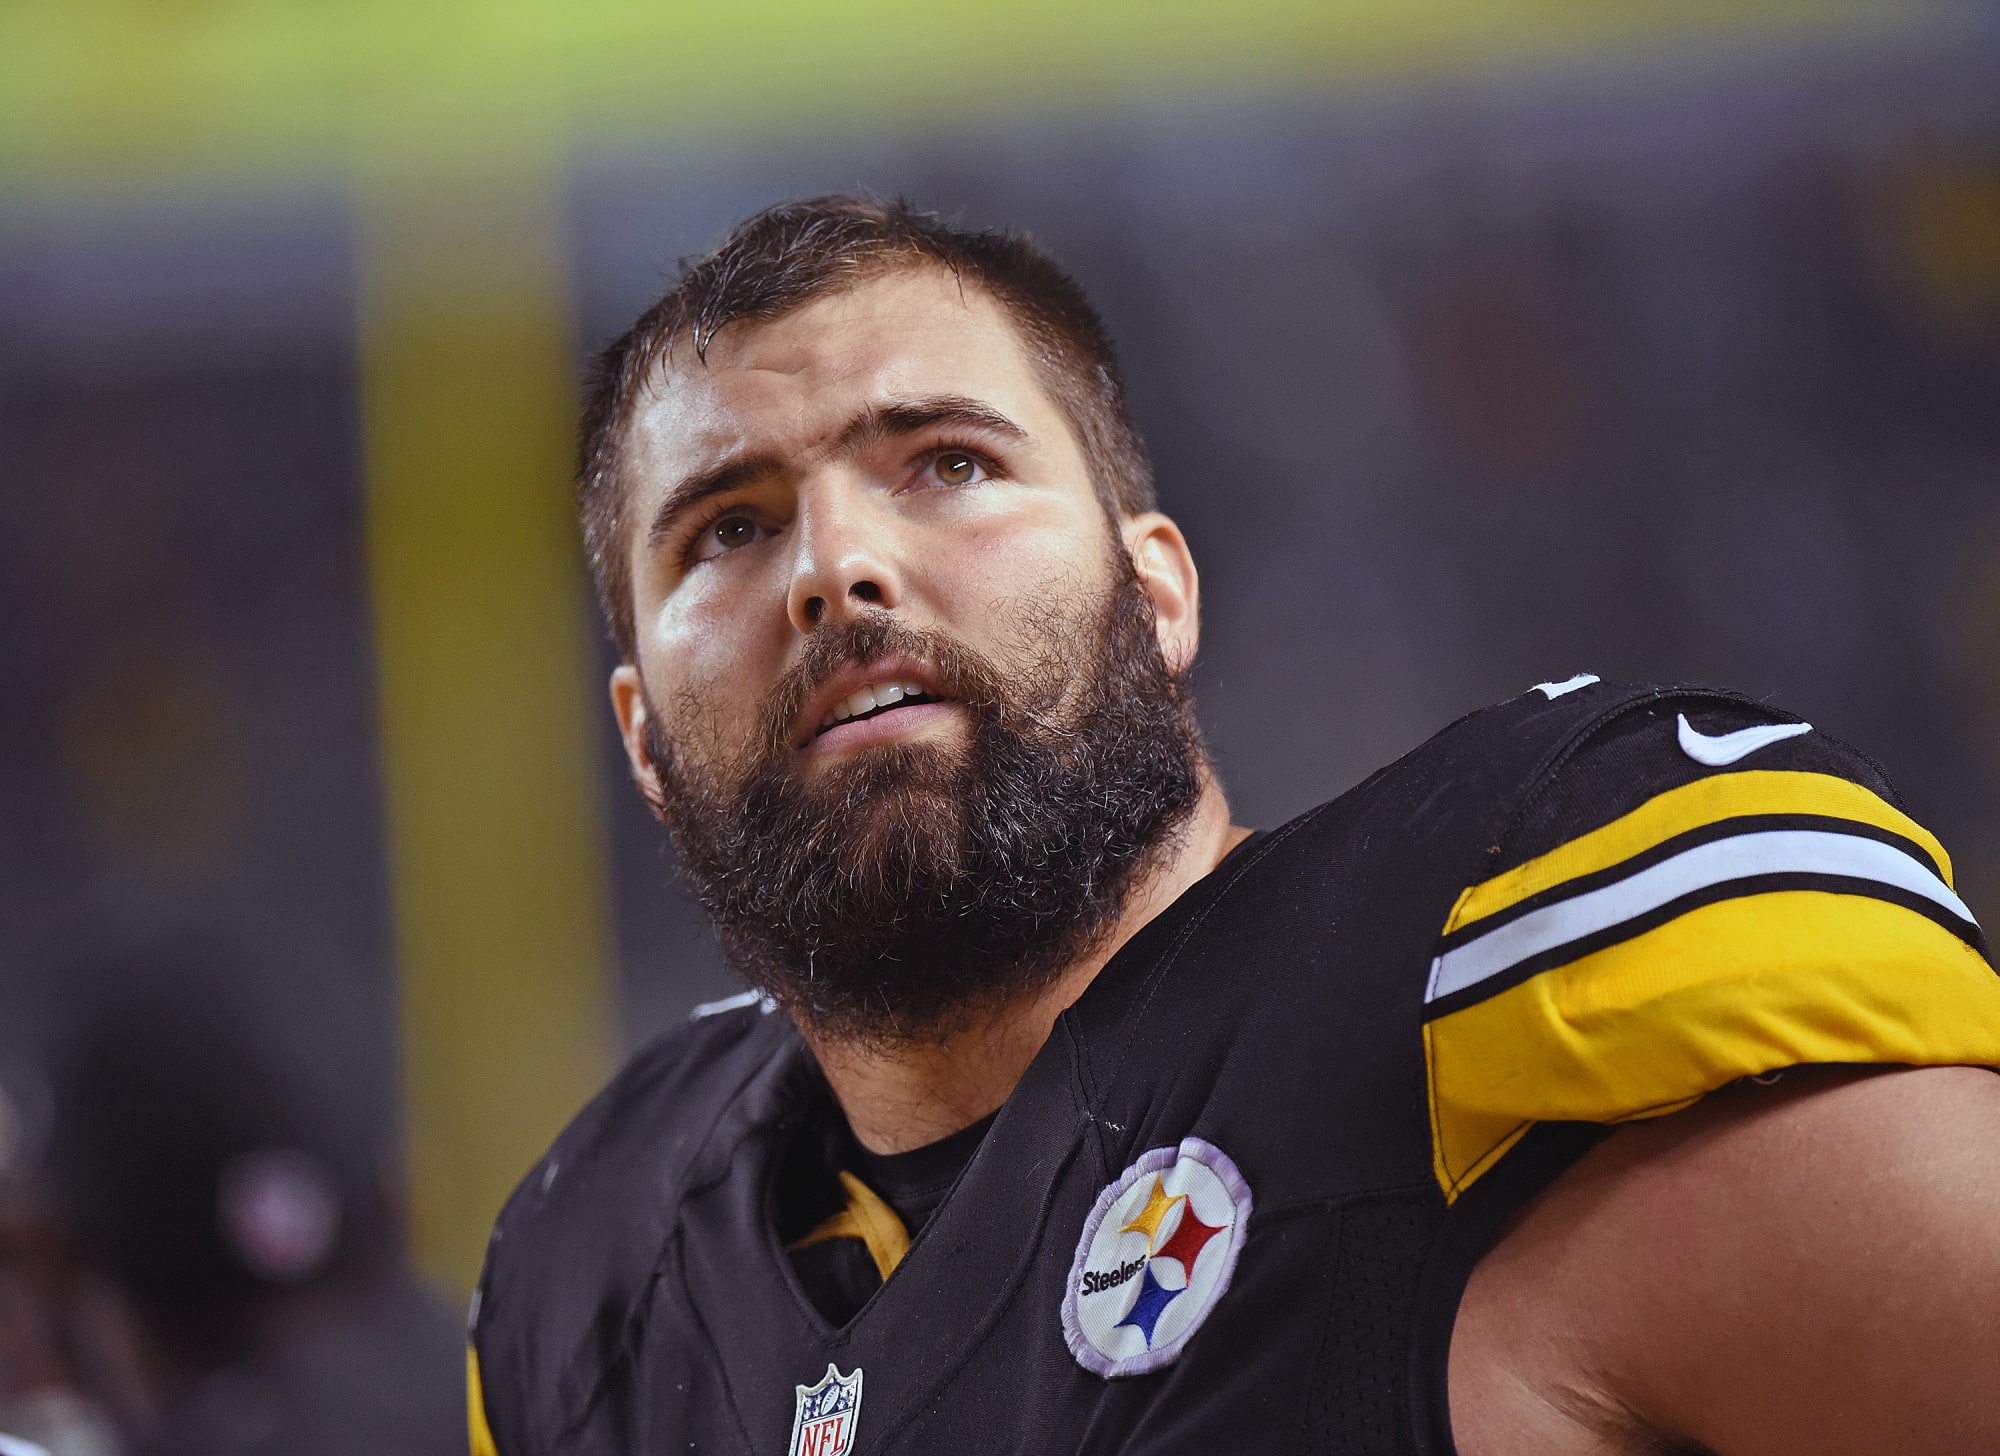 Who is Alejandro Villanueva, the lone Steeler who stood for the anthem? 